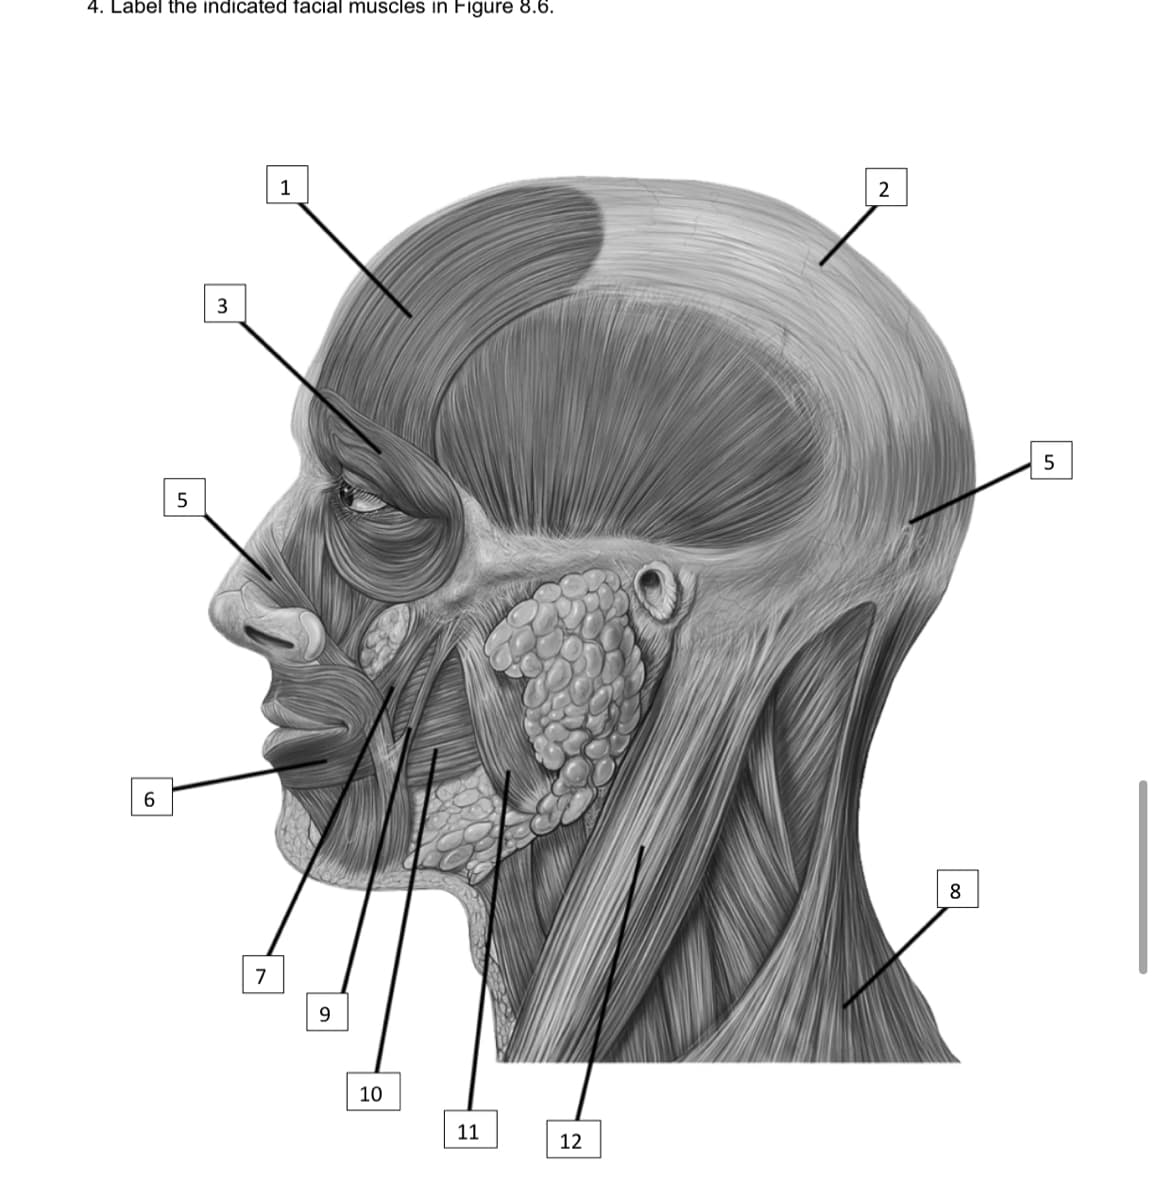 4. Label the indicated facial muscles in Figure 8.6.
1
5
6.
7
9.
10
11
12
